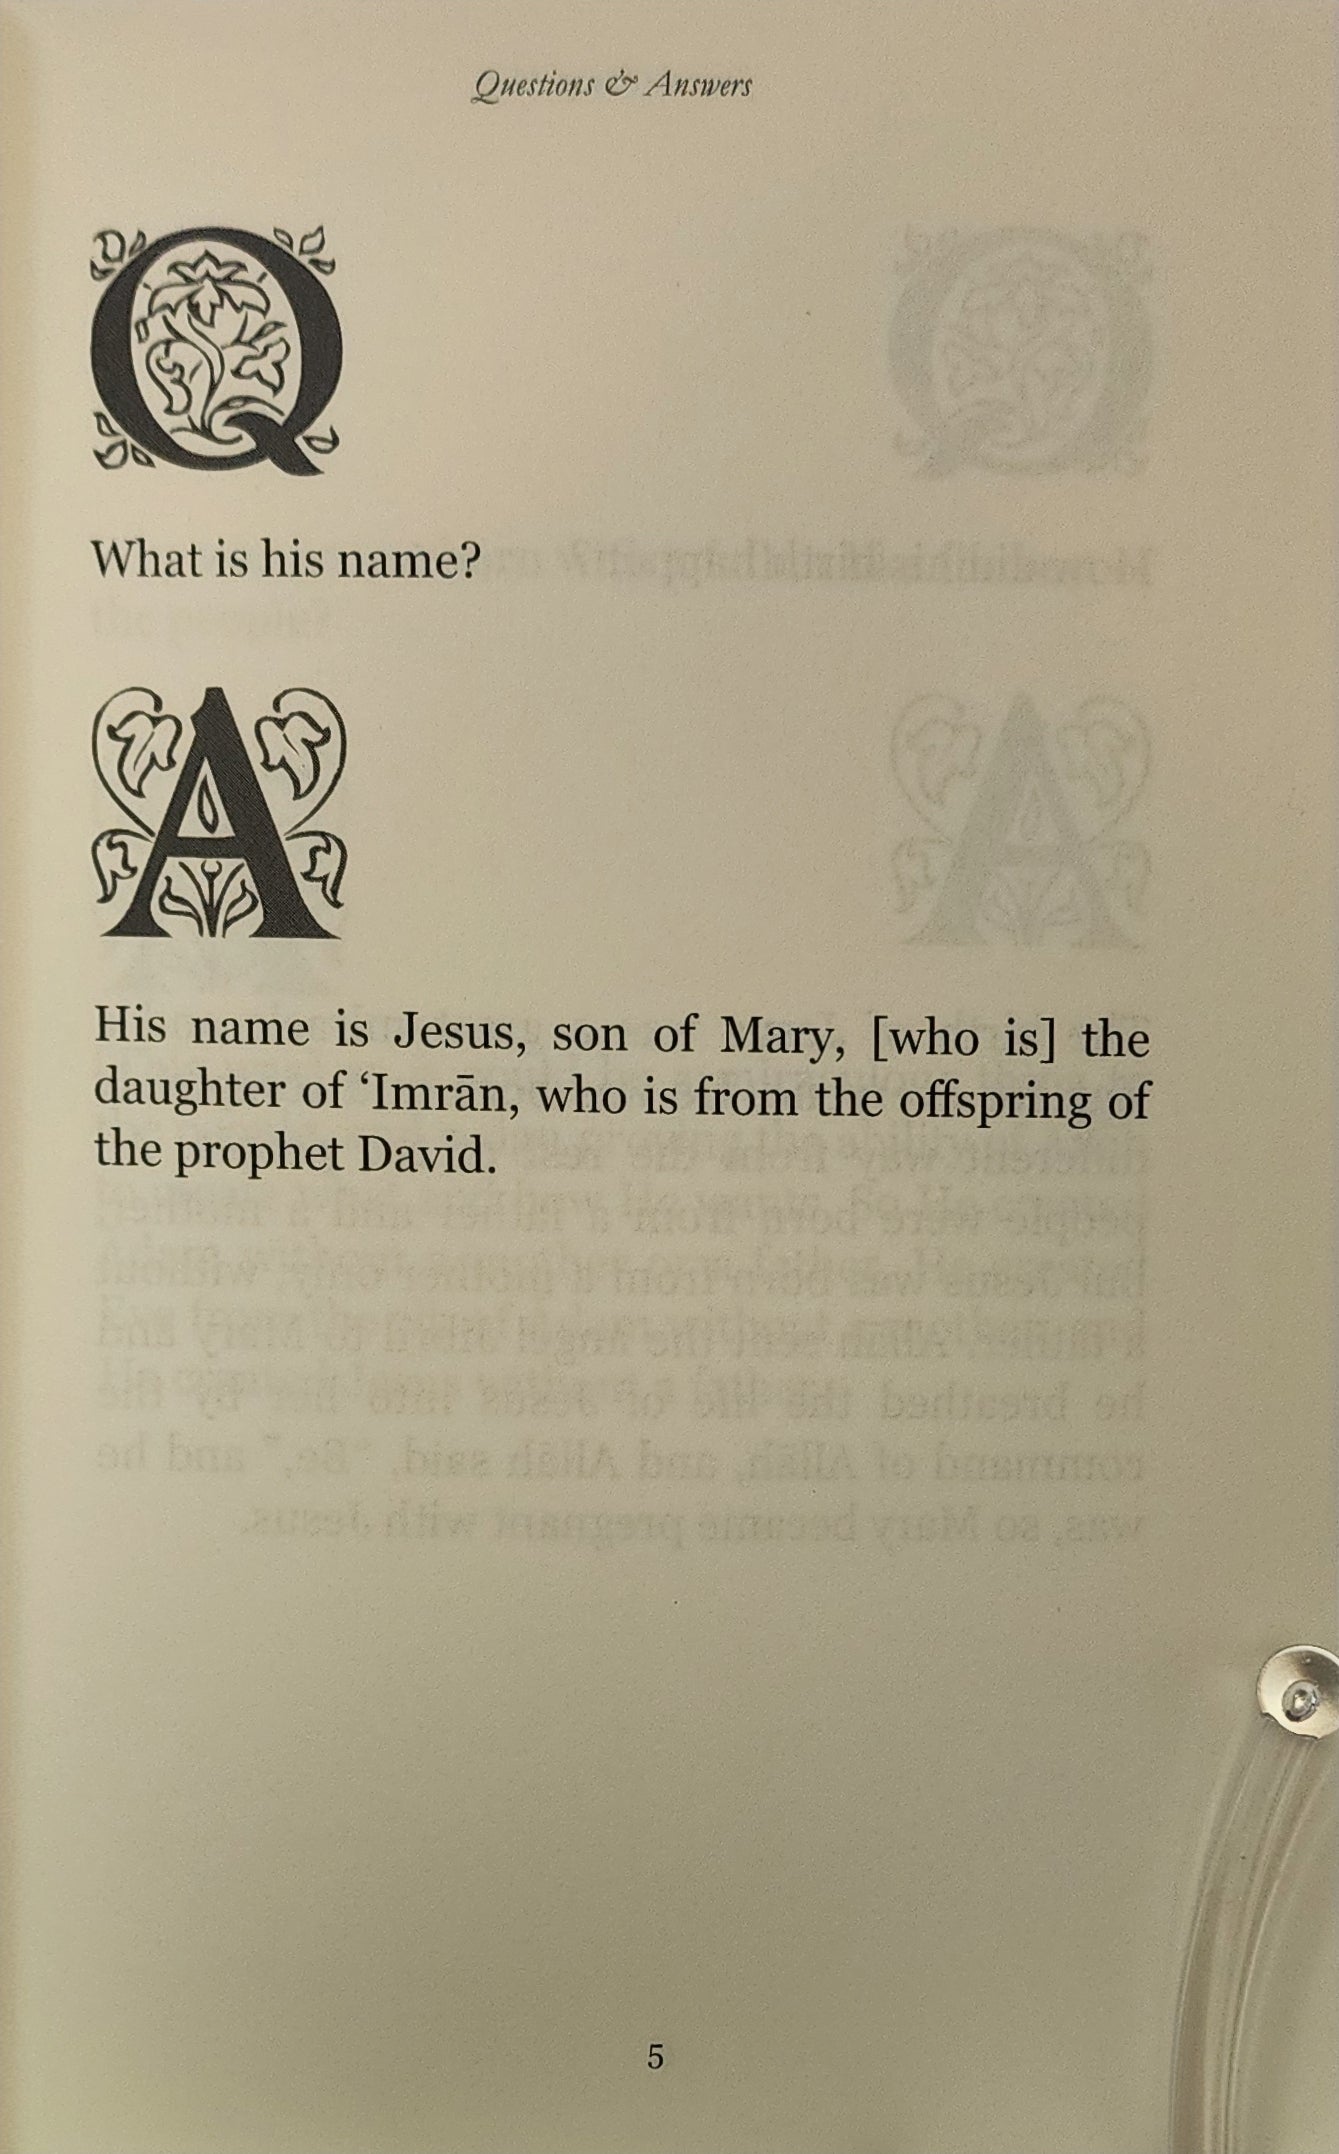 Jesus The Son of Mary Q&A By Salah Abdul-Wahhab Ameen